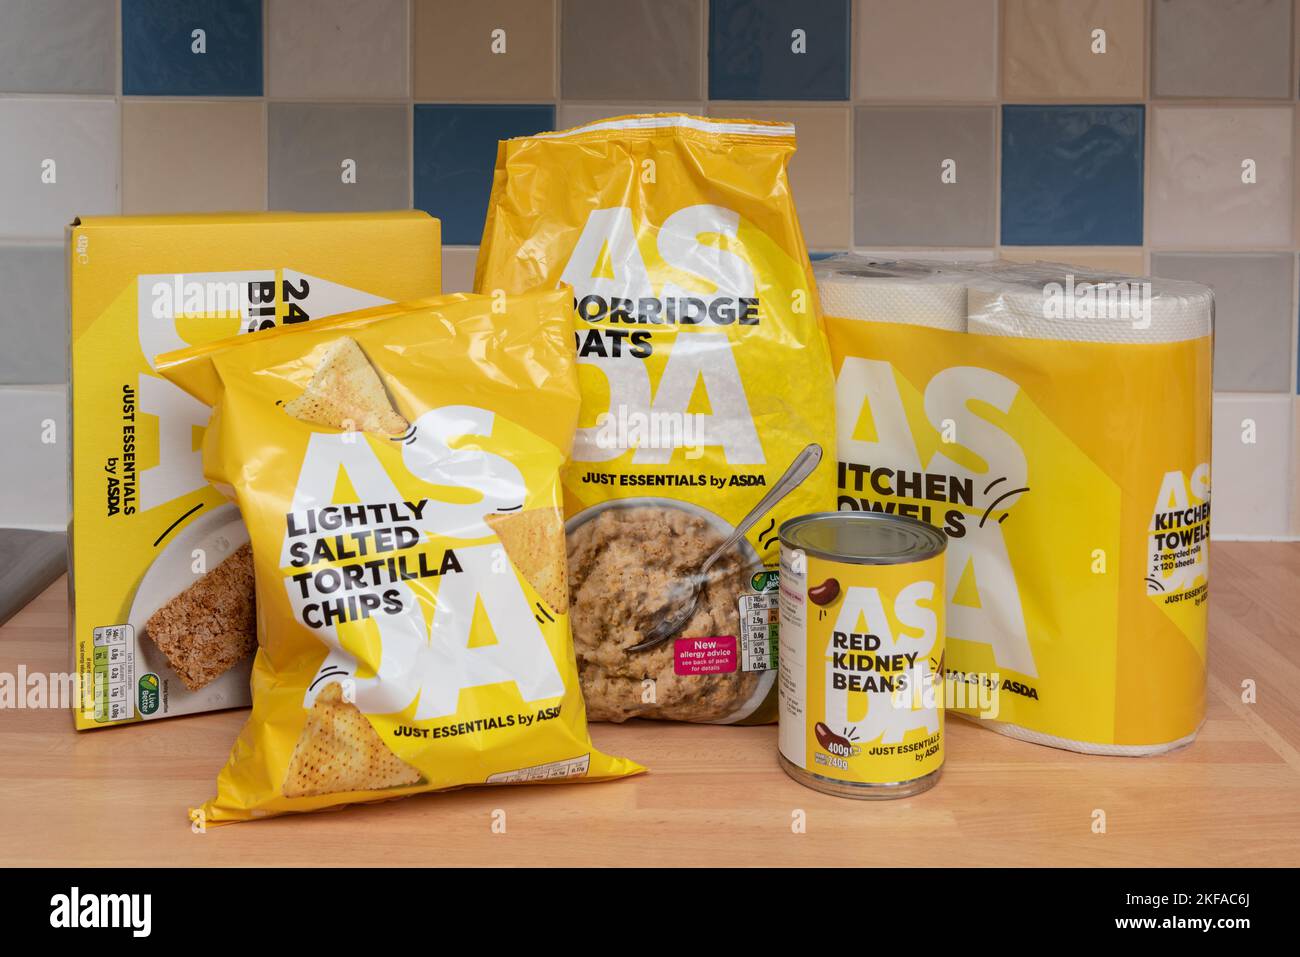 Photo of food items from the Just Essentials by ASDA range. Controversial yellow packaging suggesting food poverty. Crisis in the UK Stock Photo